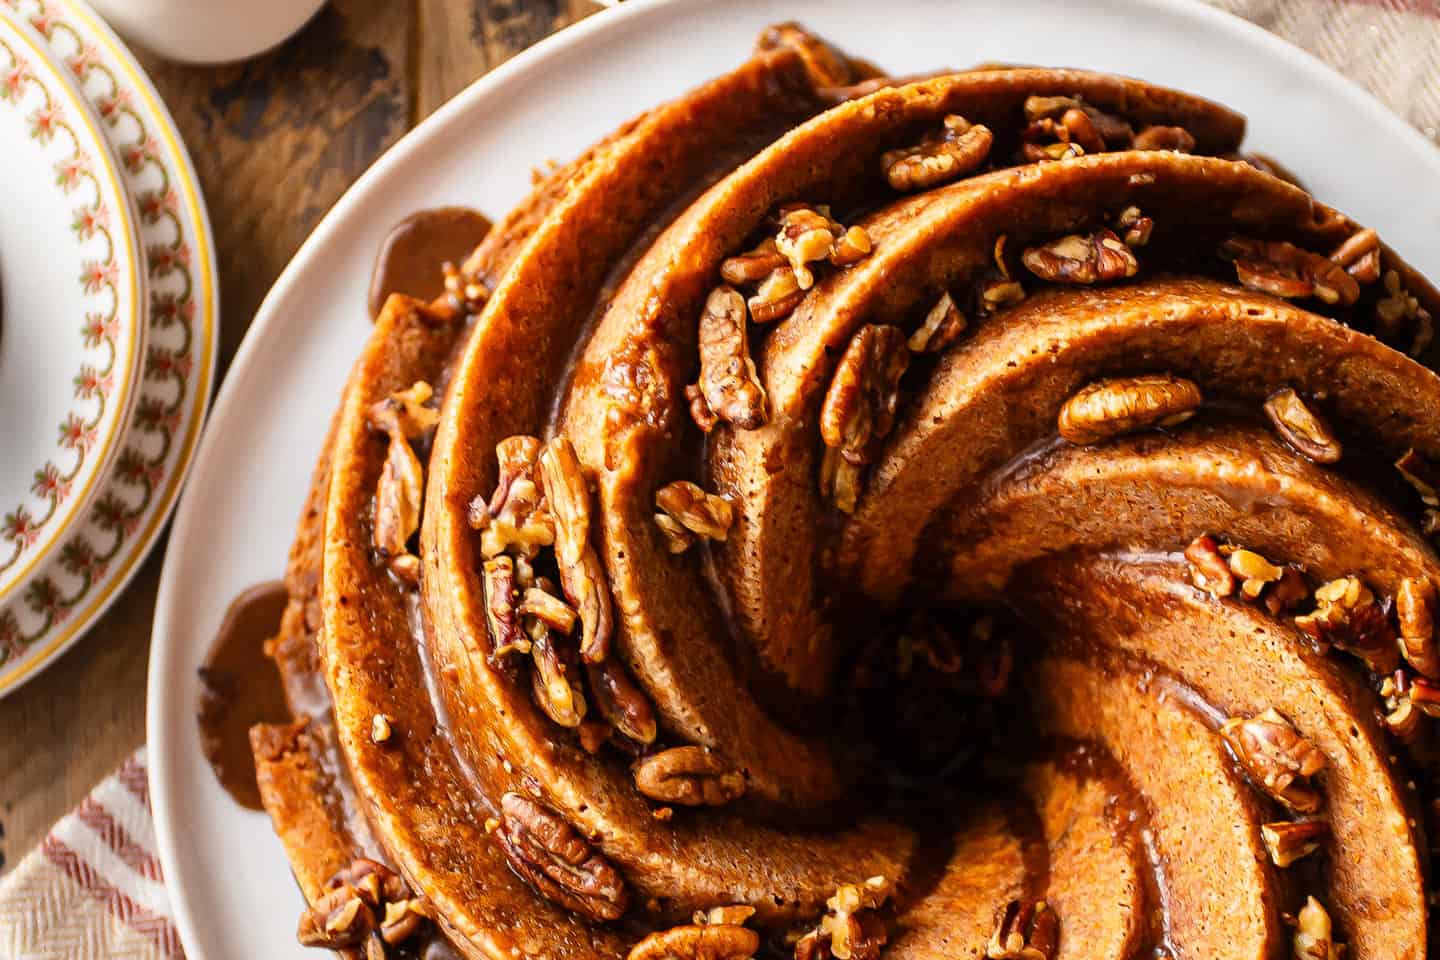 Recipe for rum cake, prepared in a bundt pan and topped with glaze and toasted nuts.